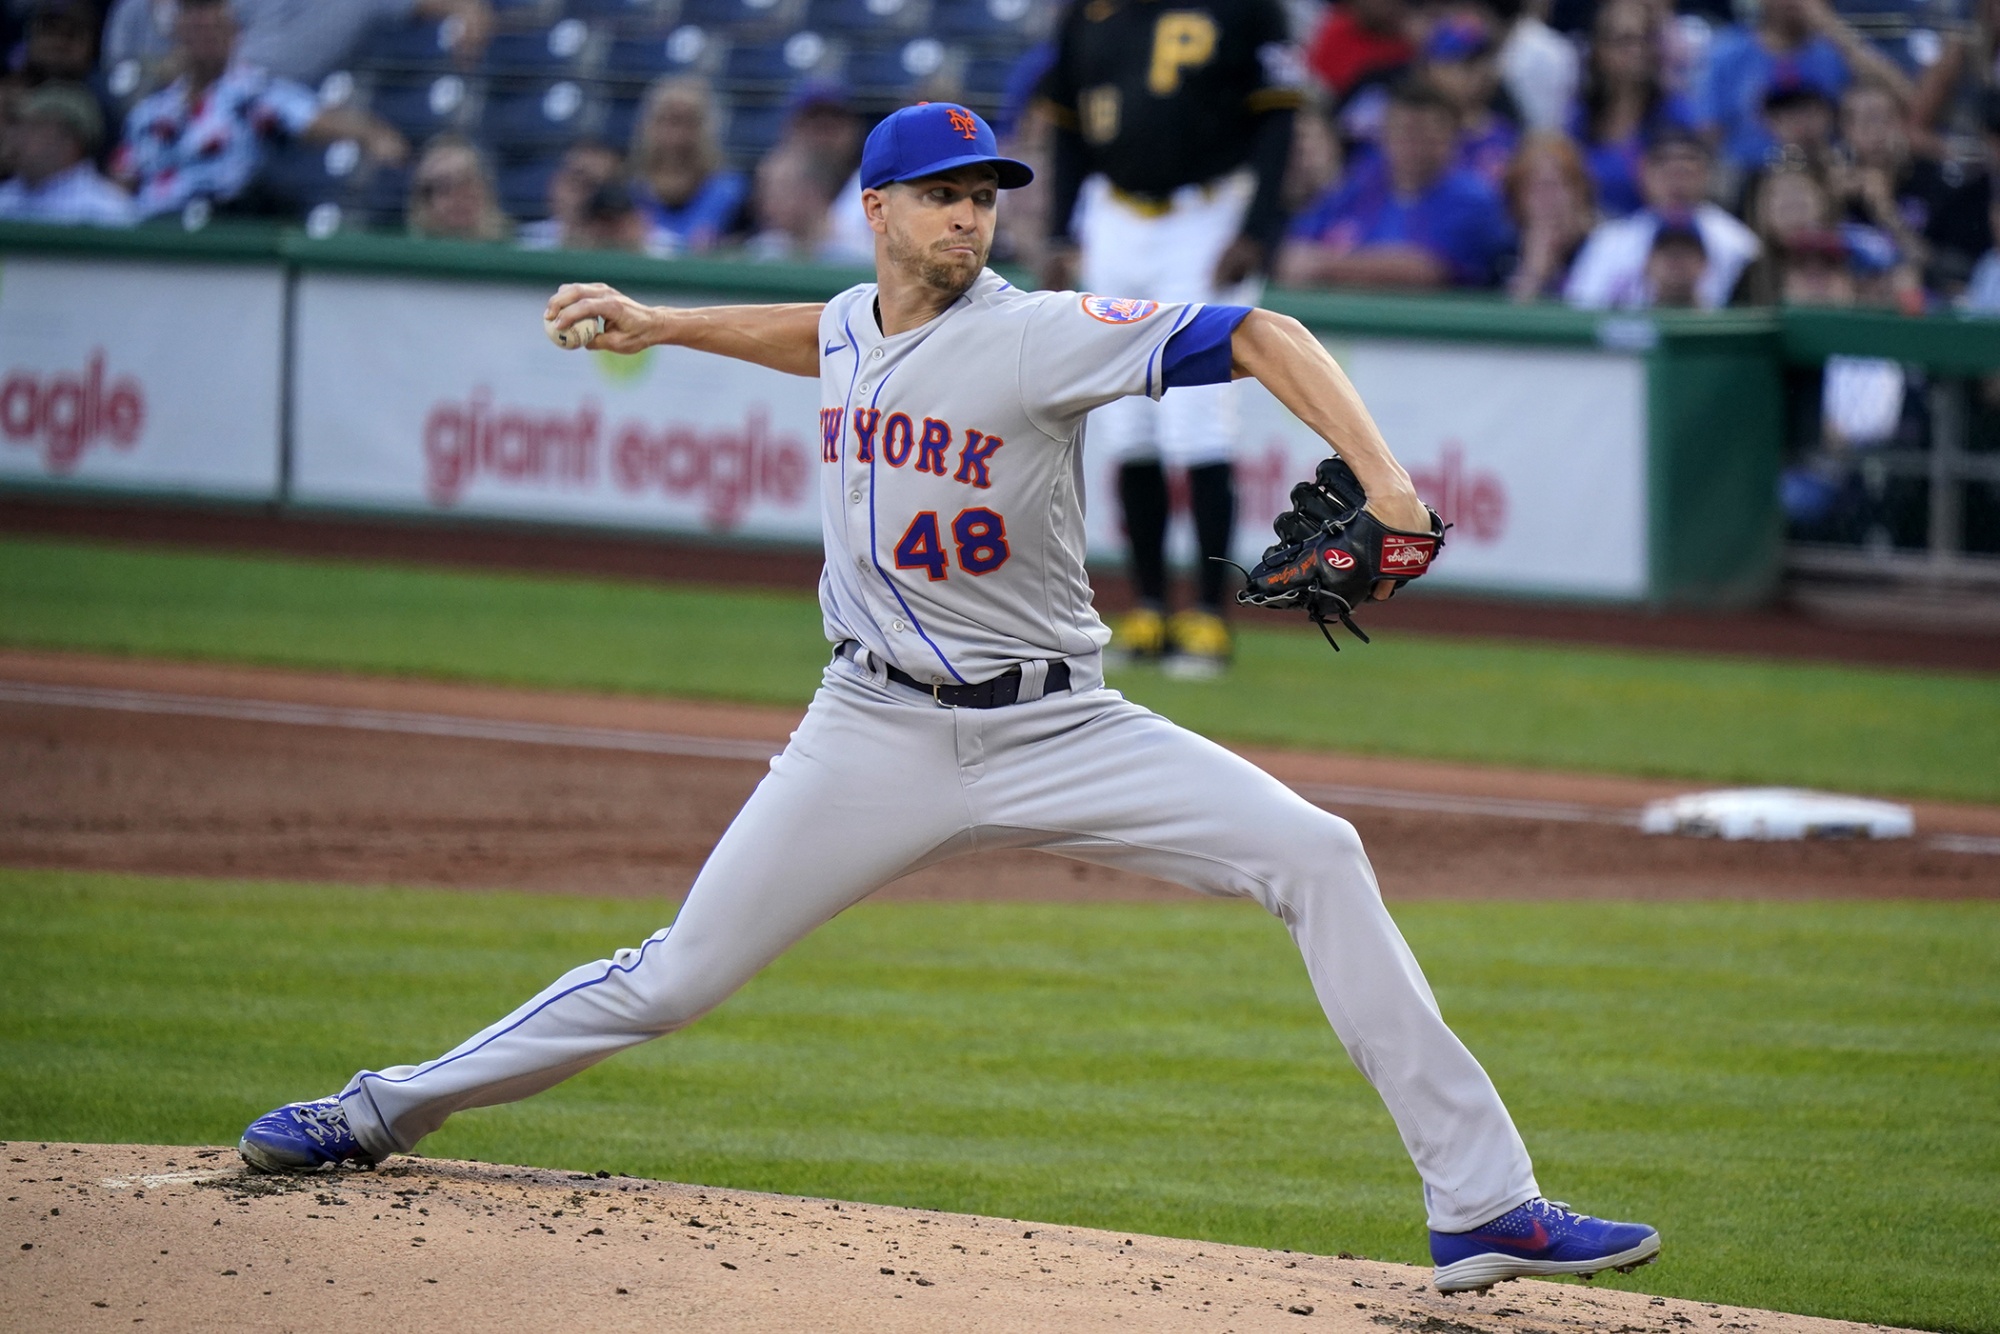 NY Mets must win now with Jacob deGrom still in his prime